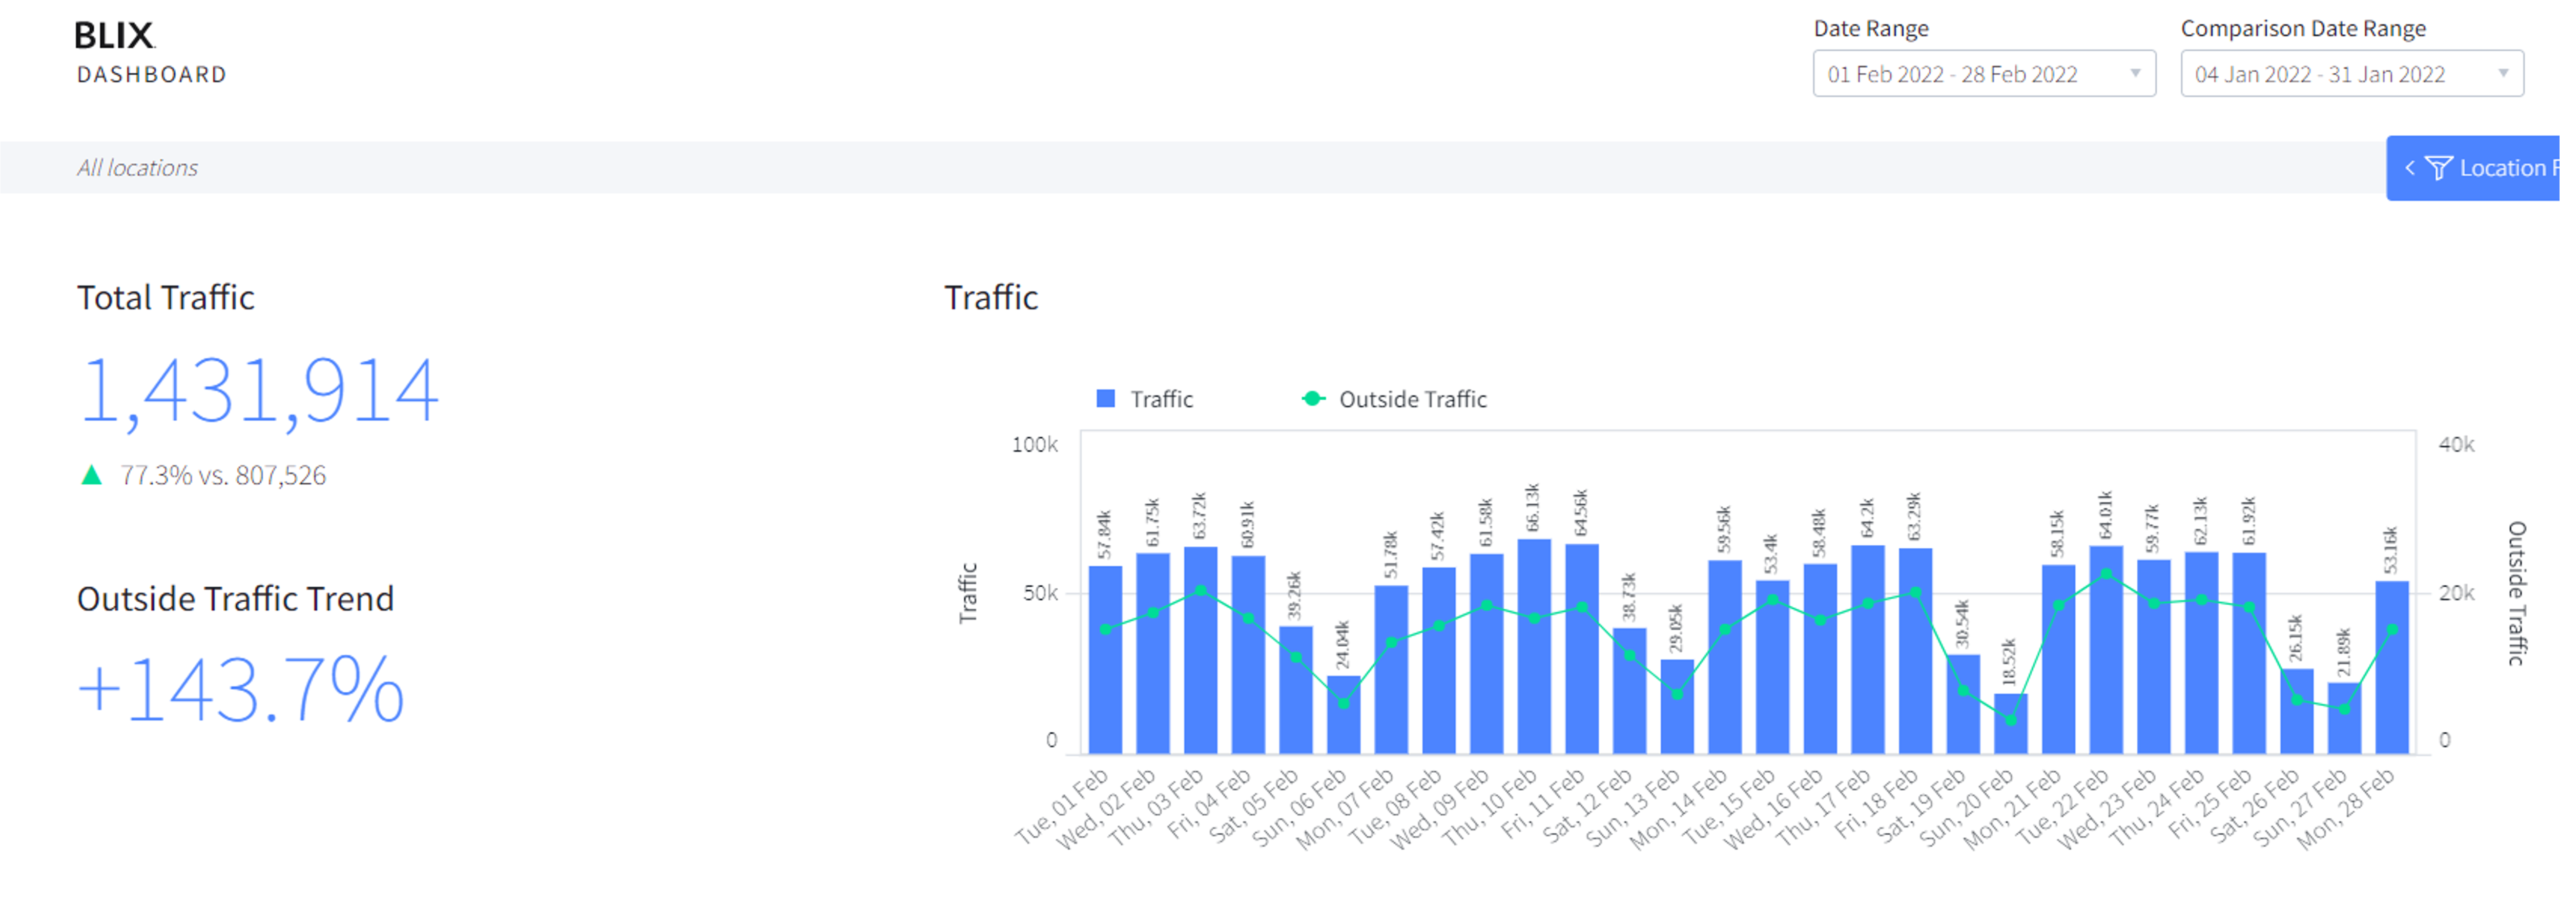 Dashboard Reporting For February Audience Shown On 14 Buses